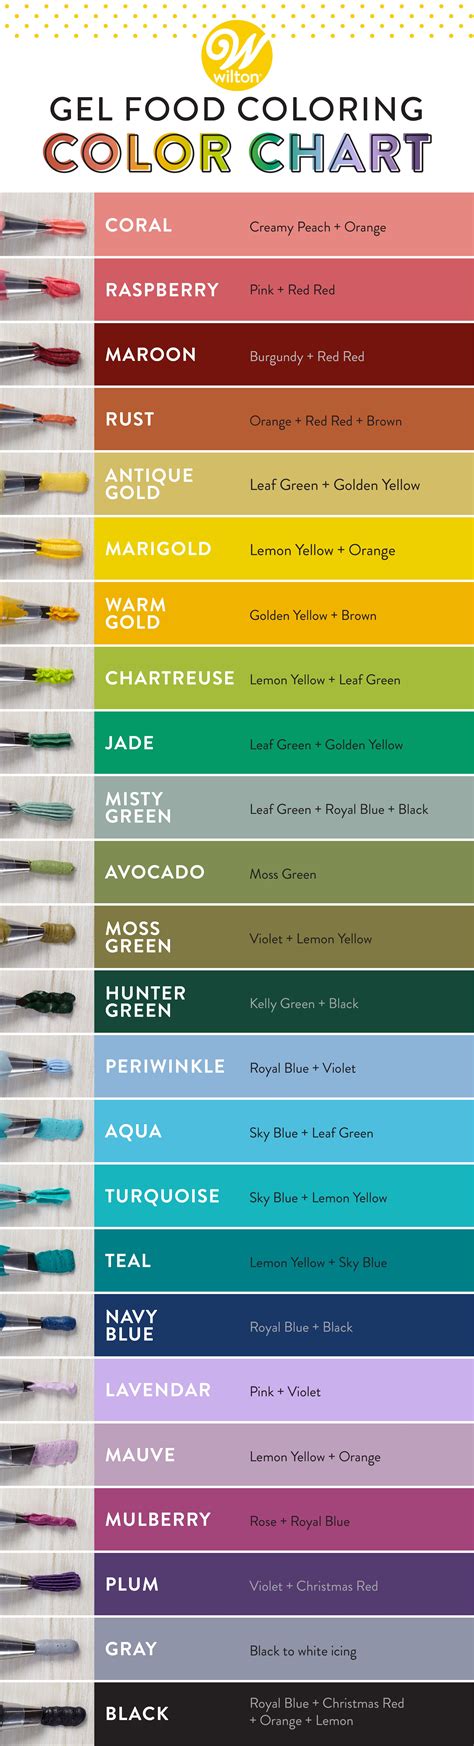 Food Coloring Color Chart